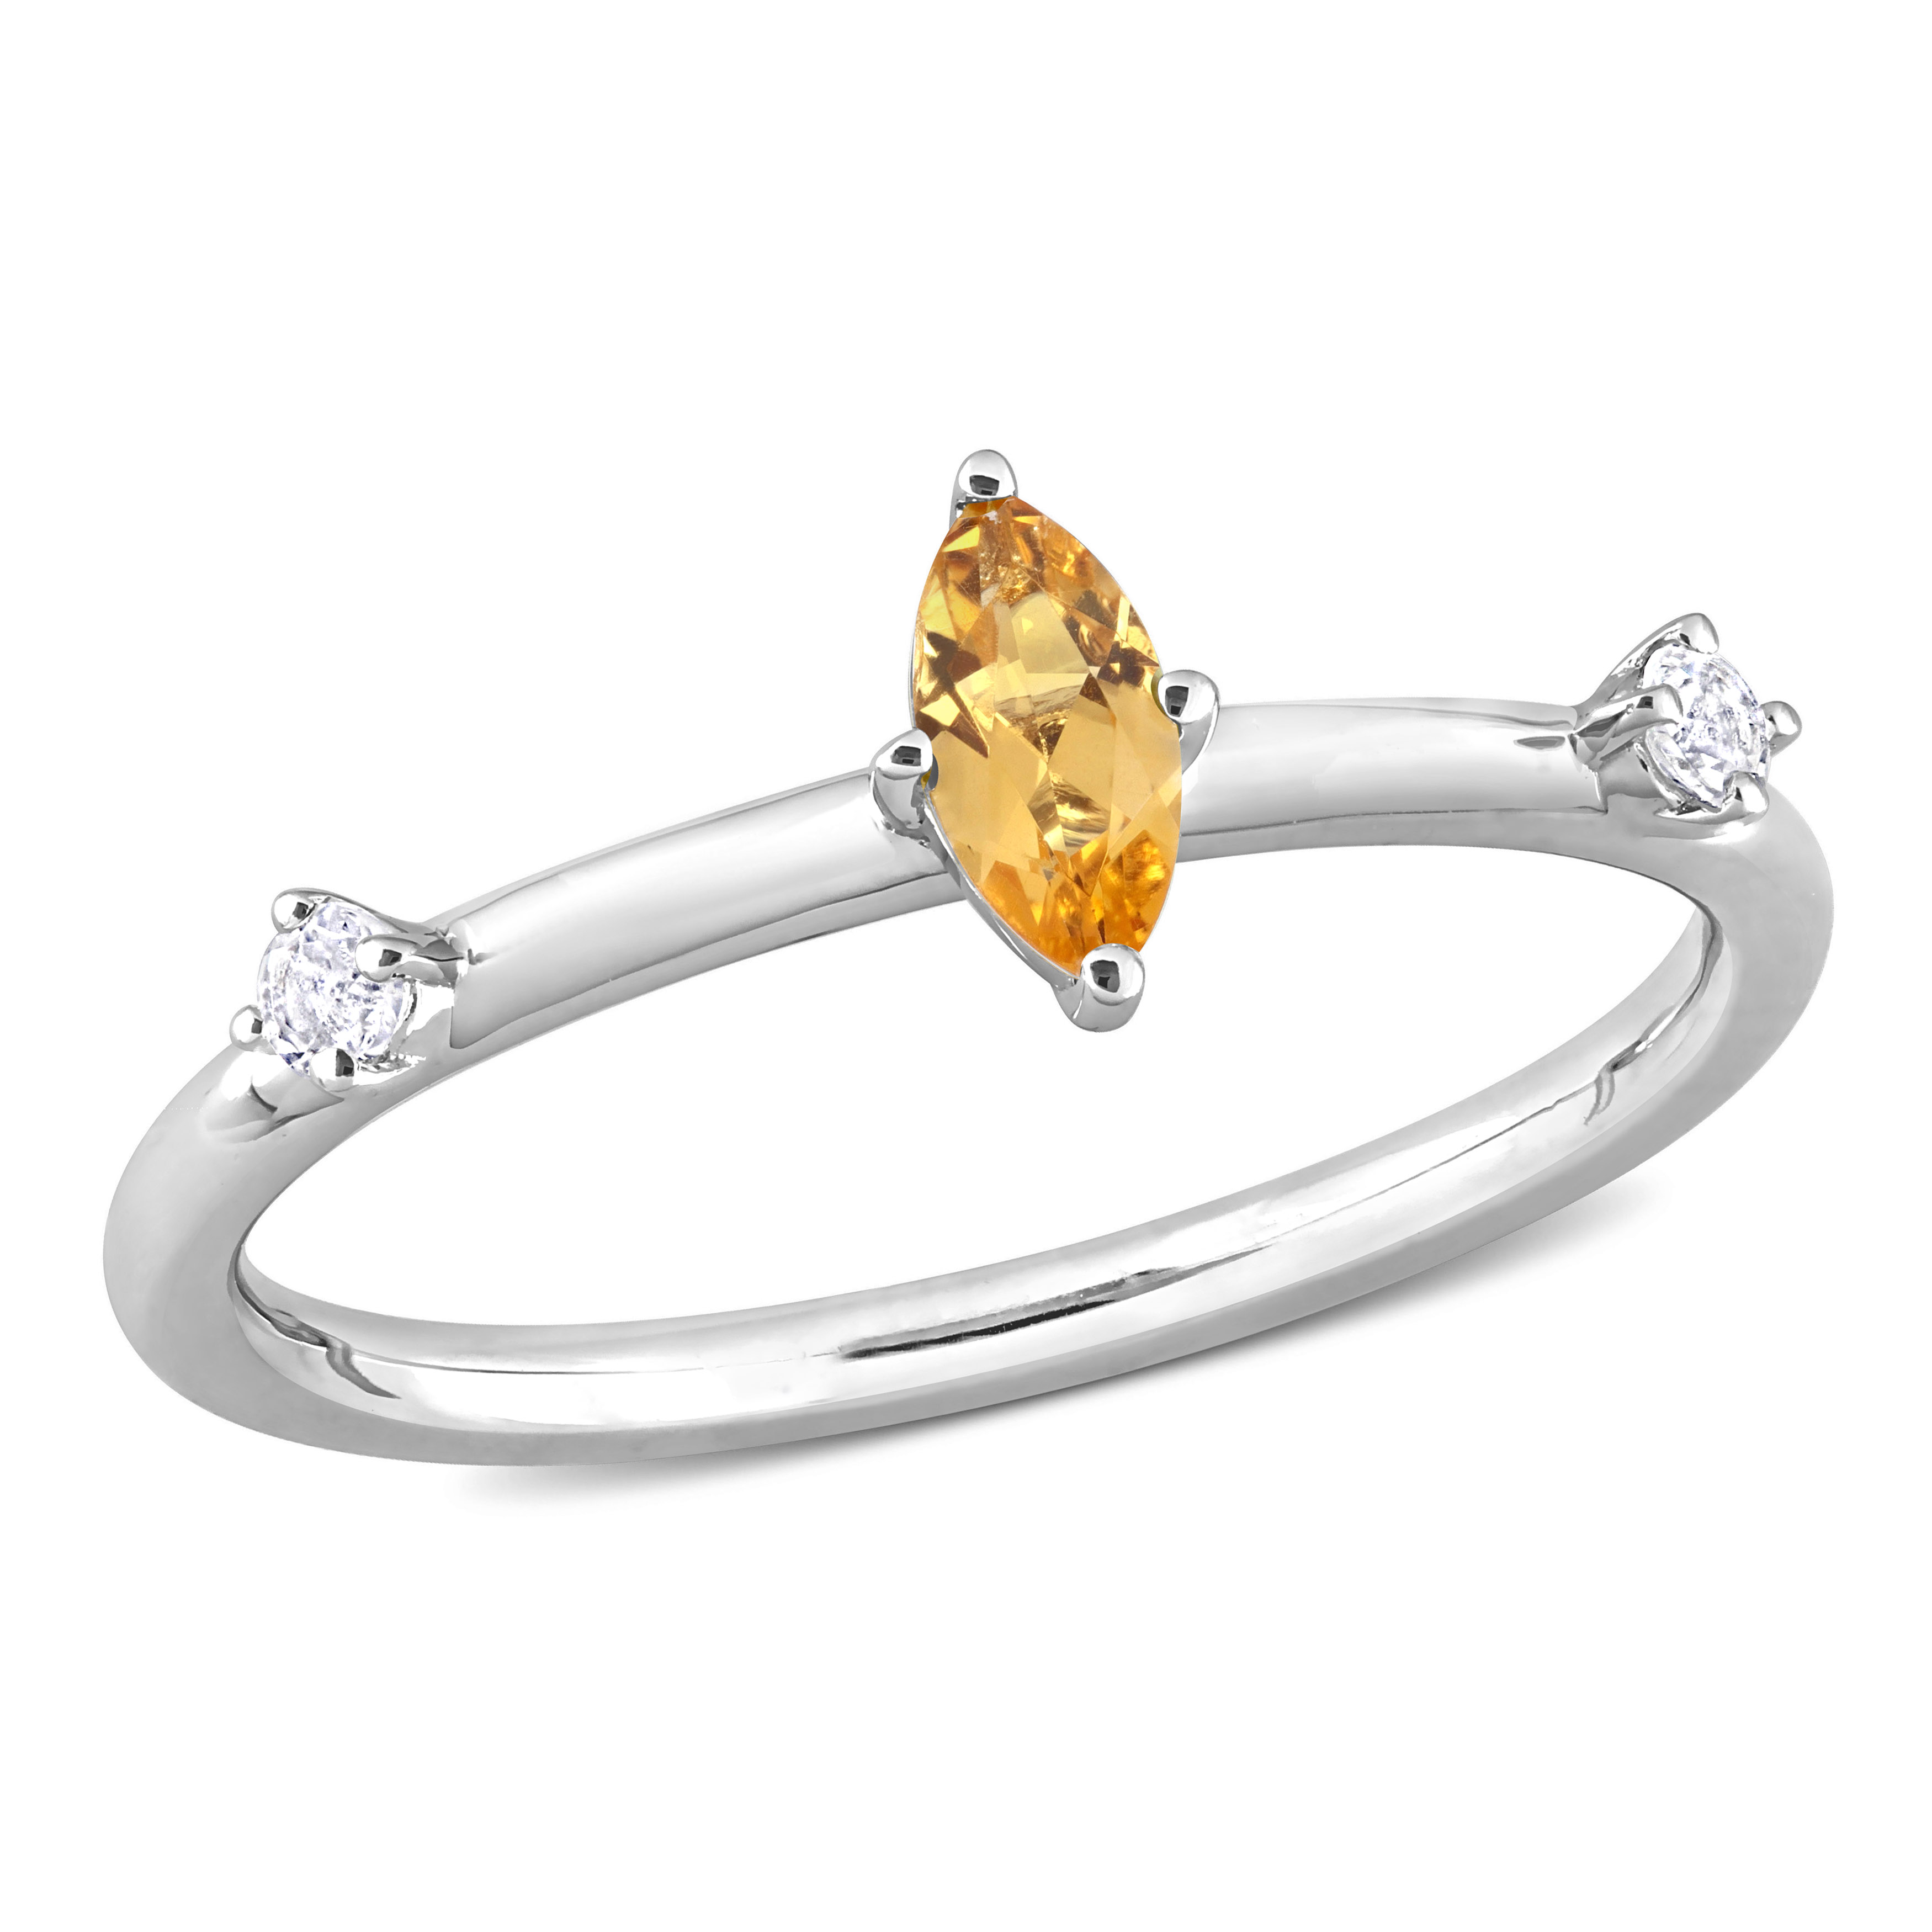 1/3 CT TGW Marquise Citrine and White Topaz 3-Stone Ring in Sterling Silver